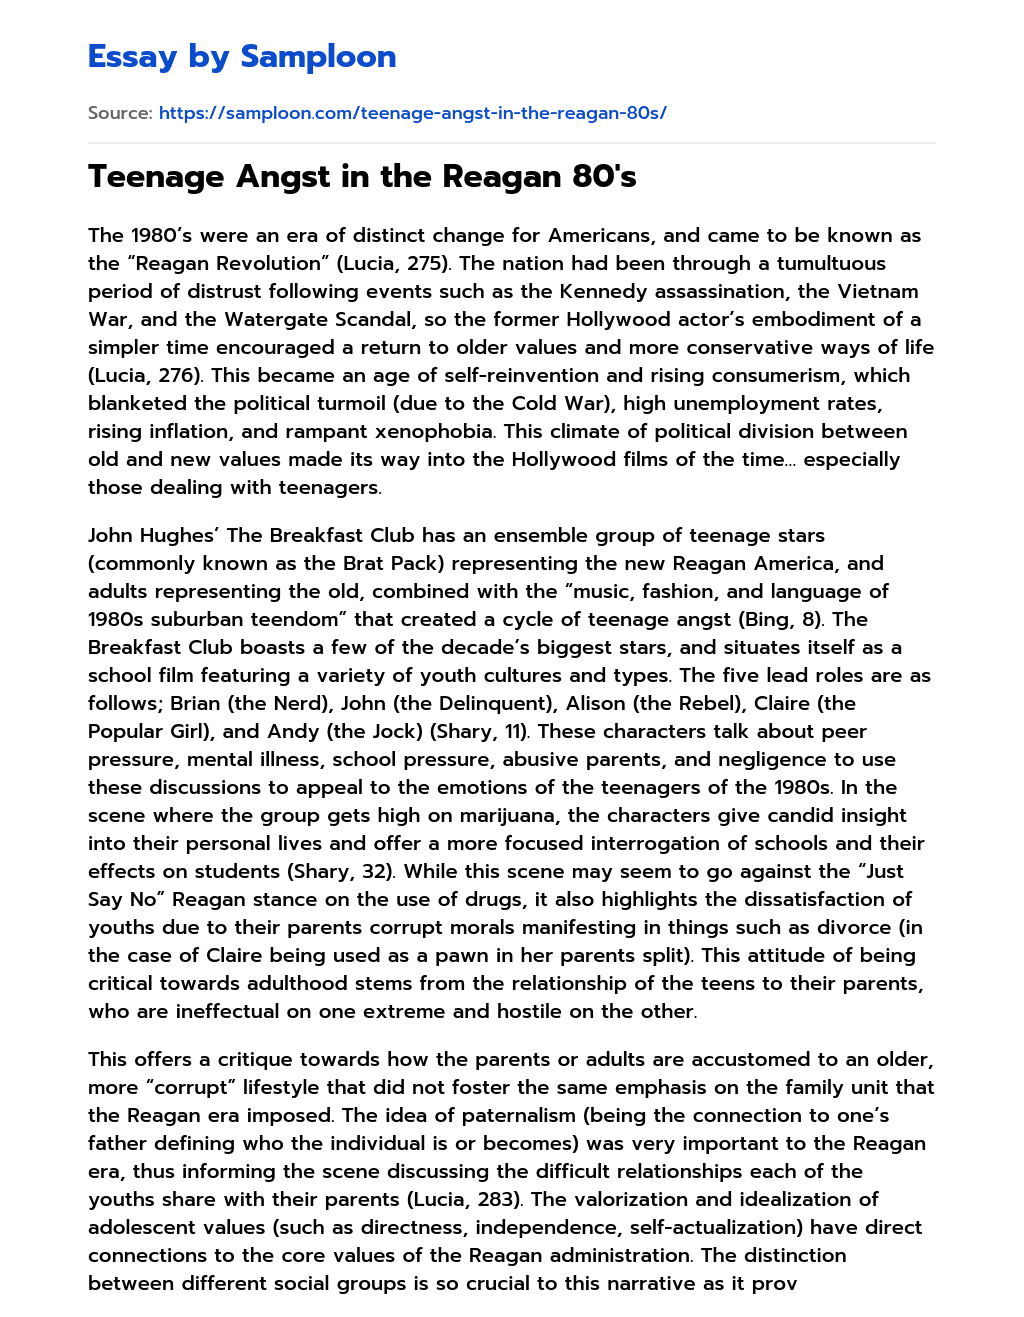 Teenage Angst in the Reagan 80’s essay